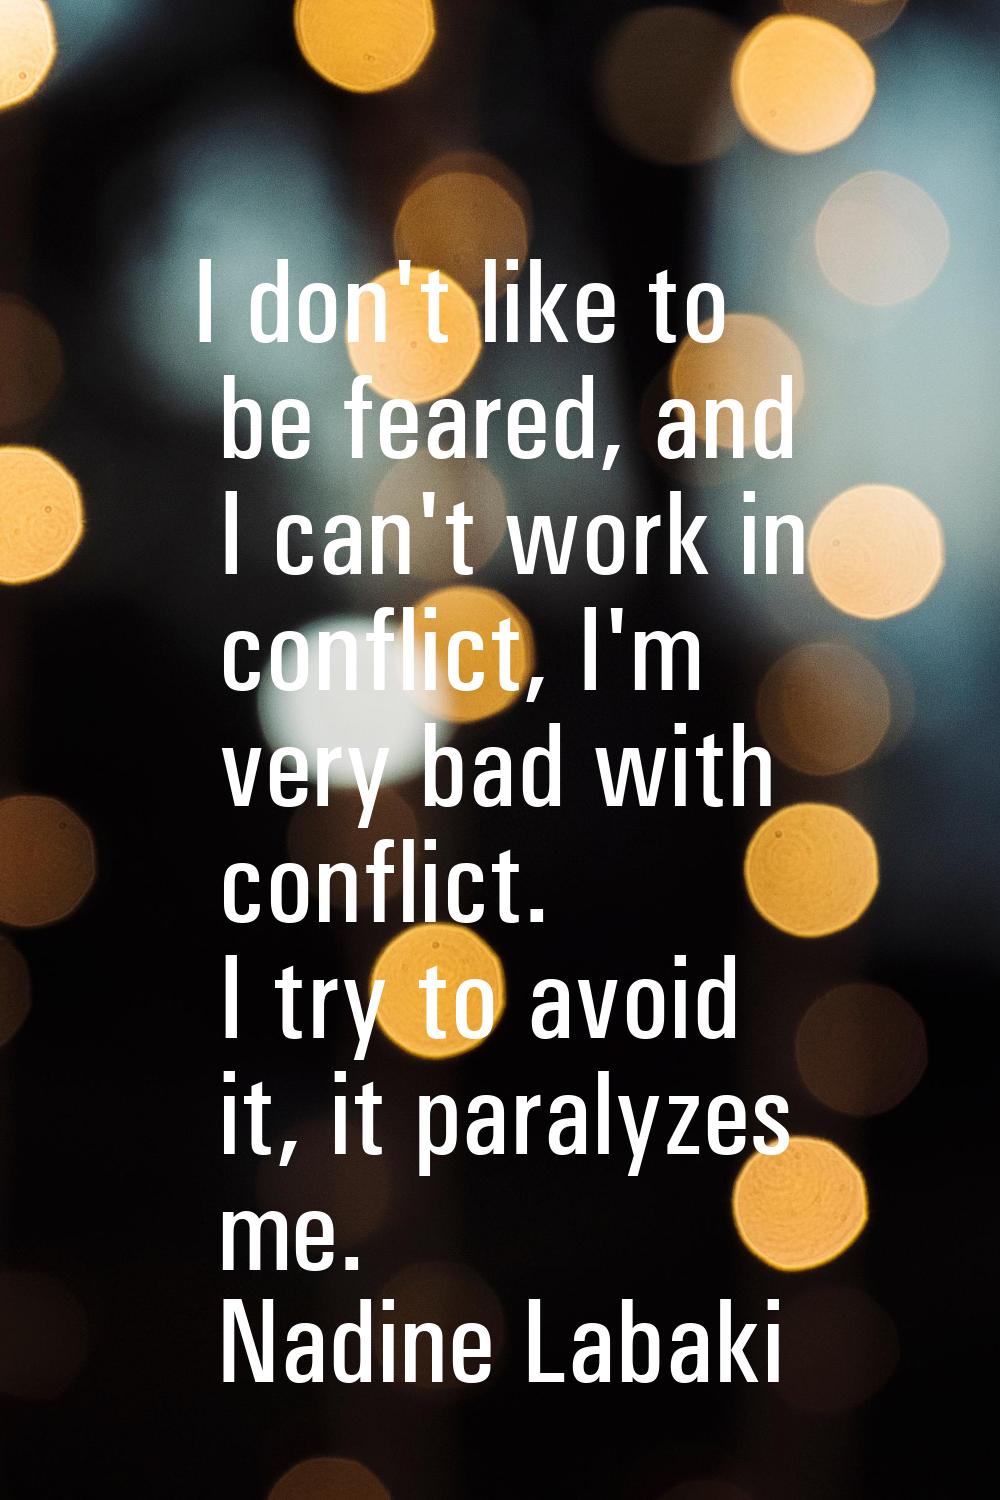 I don't like to be feared, and I can't work in conflict, I'm very bad with conflict. I try to avoid